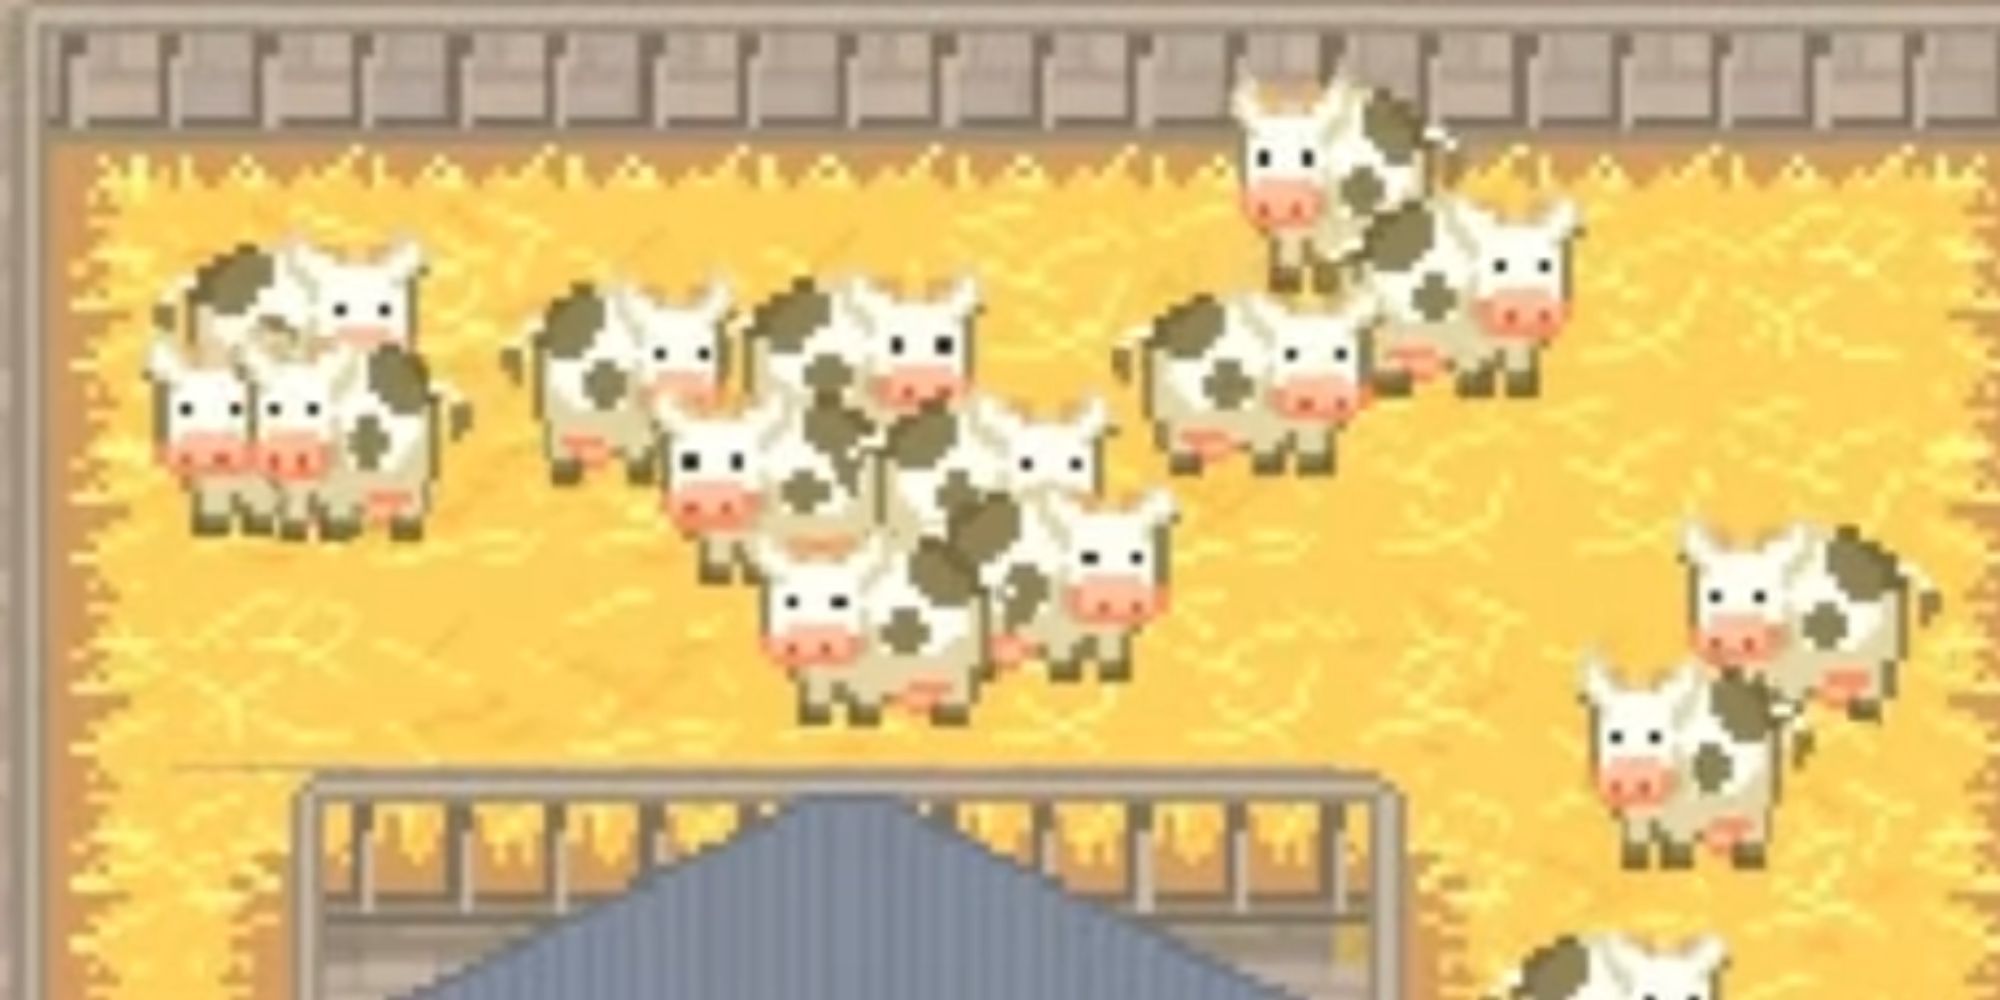 Let's Build A Zoo Many Cows In An Enclosure Together